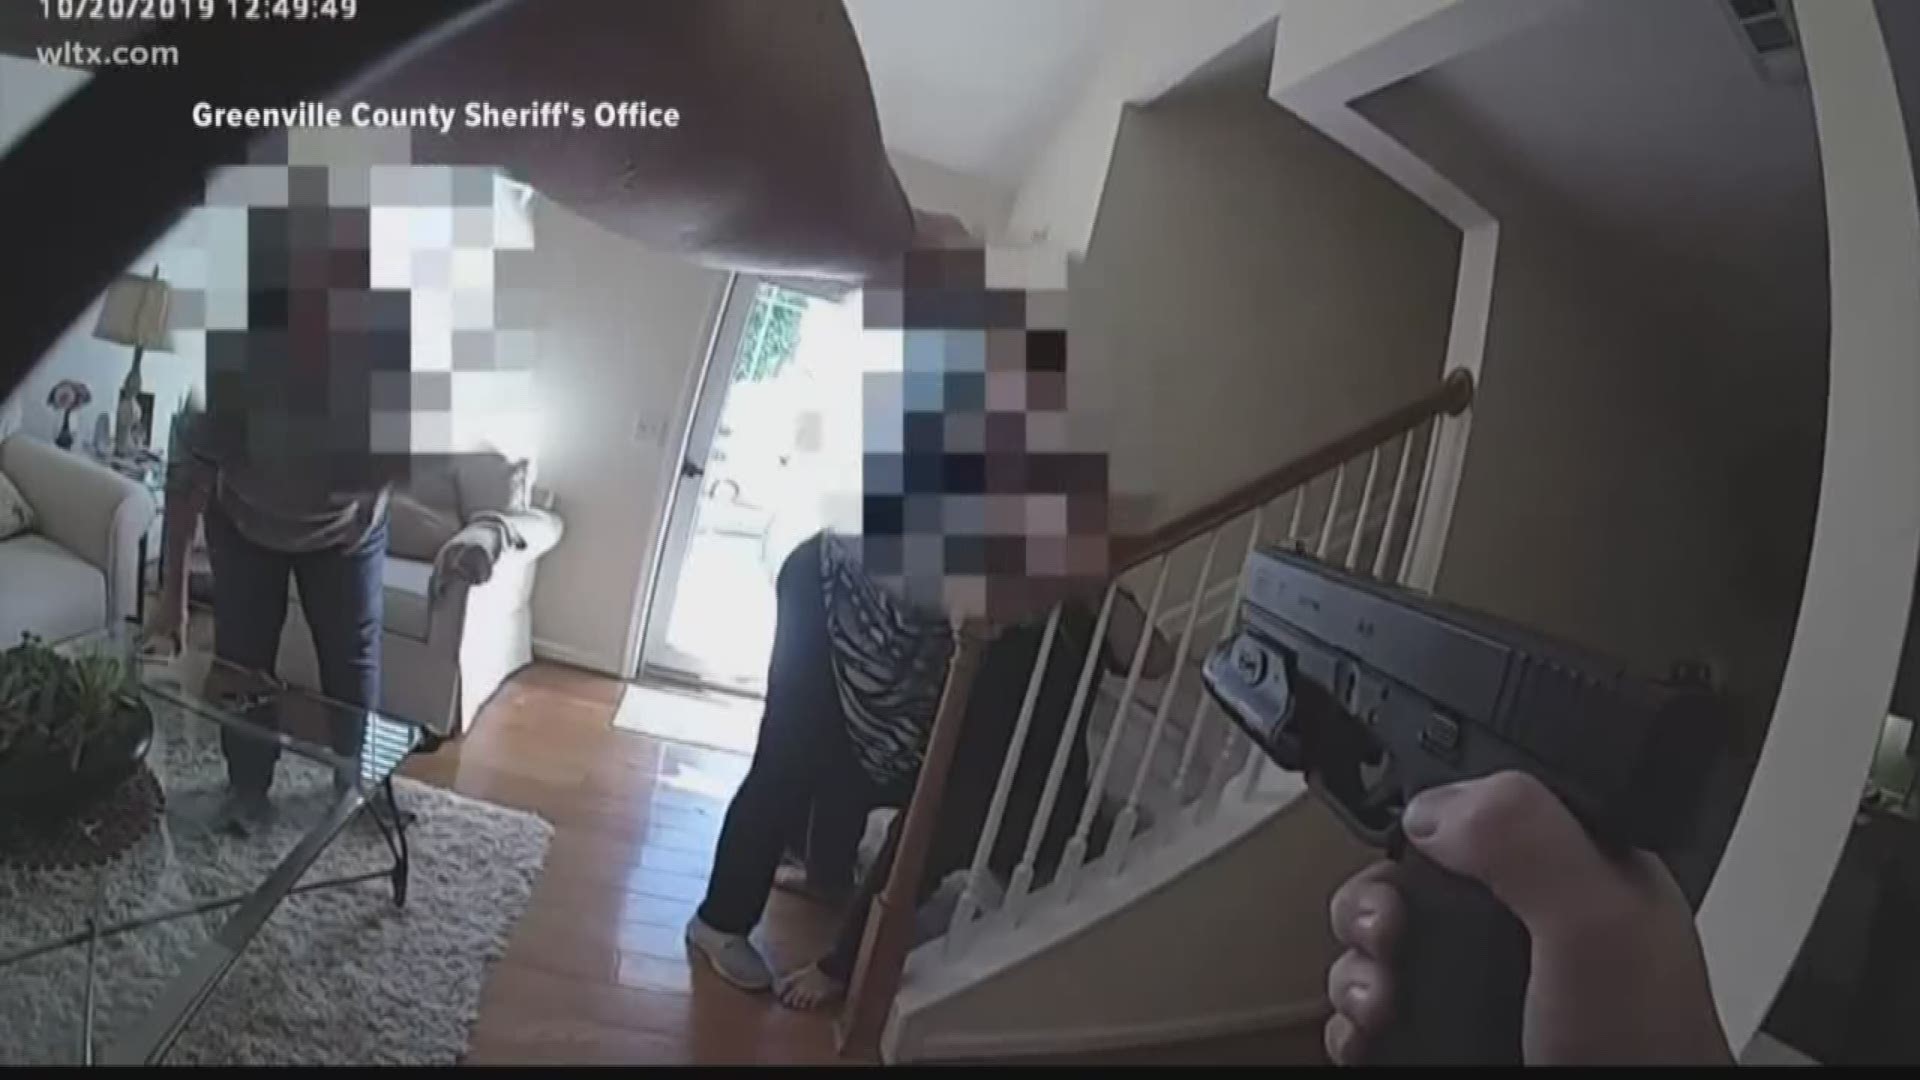 Body camera video shows the October 20th confrontation where a Greenville County deputy unintentionally shoots the mother of a suspect.